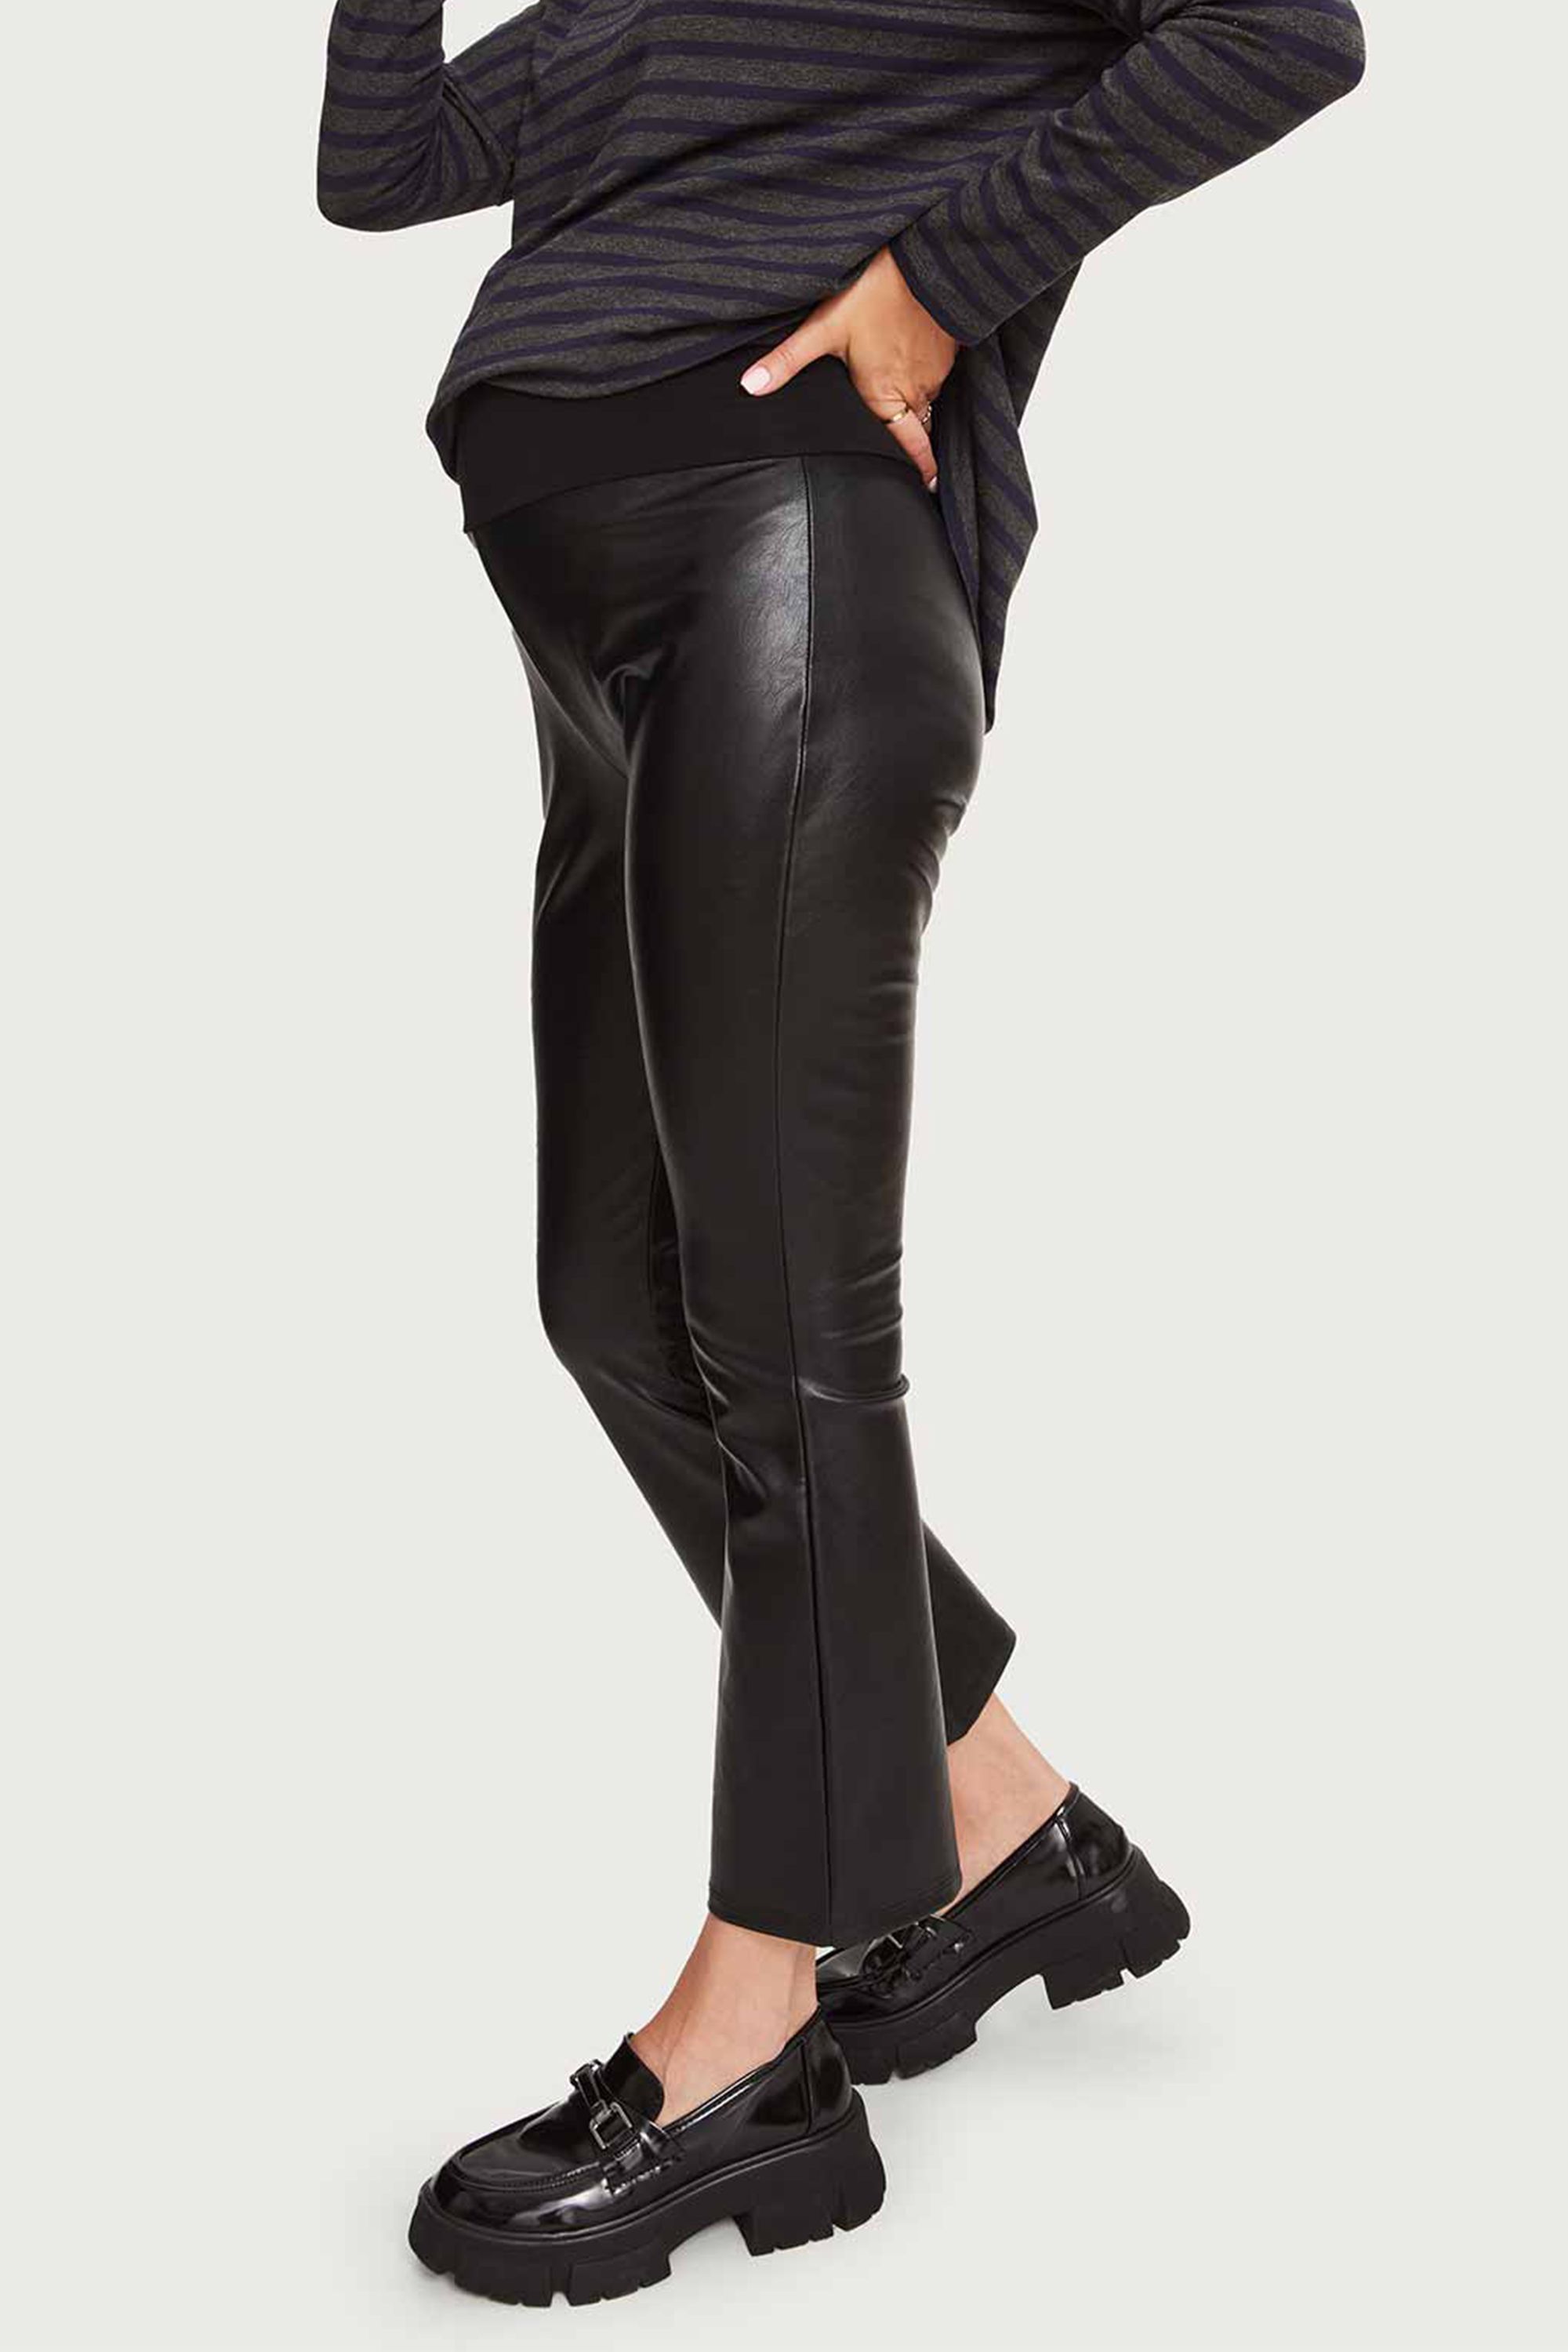 27 Best Faux Leather Leggings 2020  The Strategist